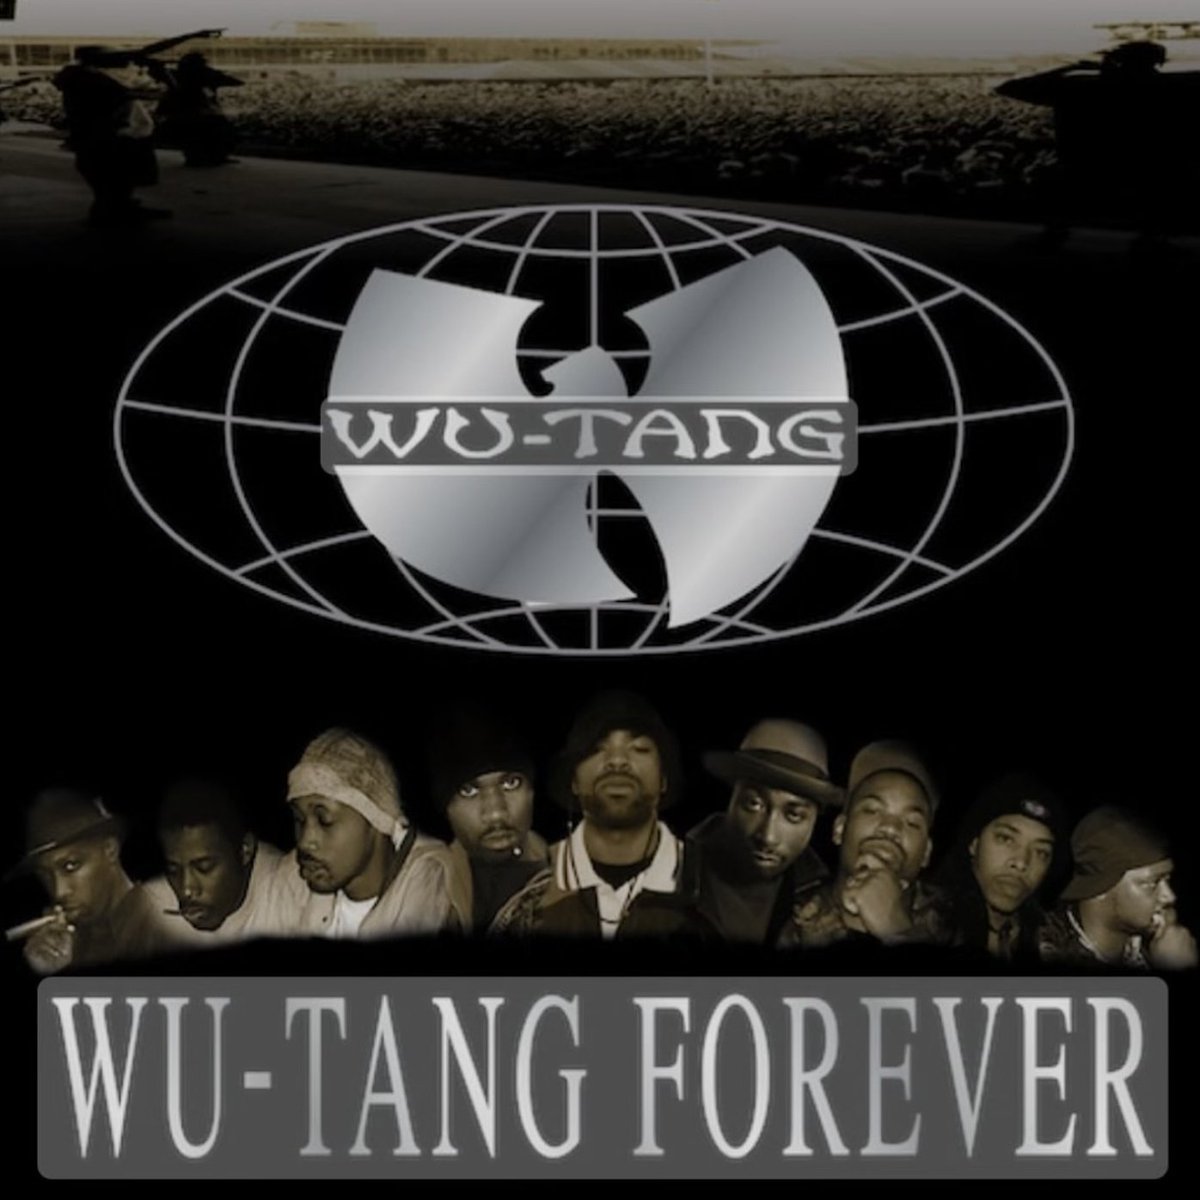 “Happy Anniversary to Wutang Forever' The second Album from Wutang Clan hit number 1 in the world and went Quadruple platinum. Today we celebrate their legendary contribution to the culture.